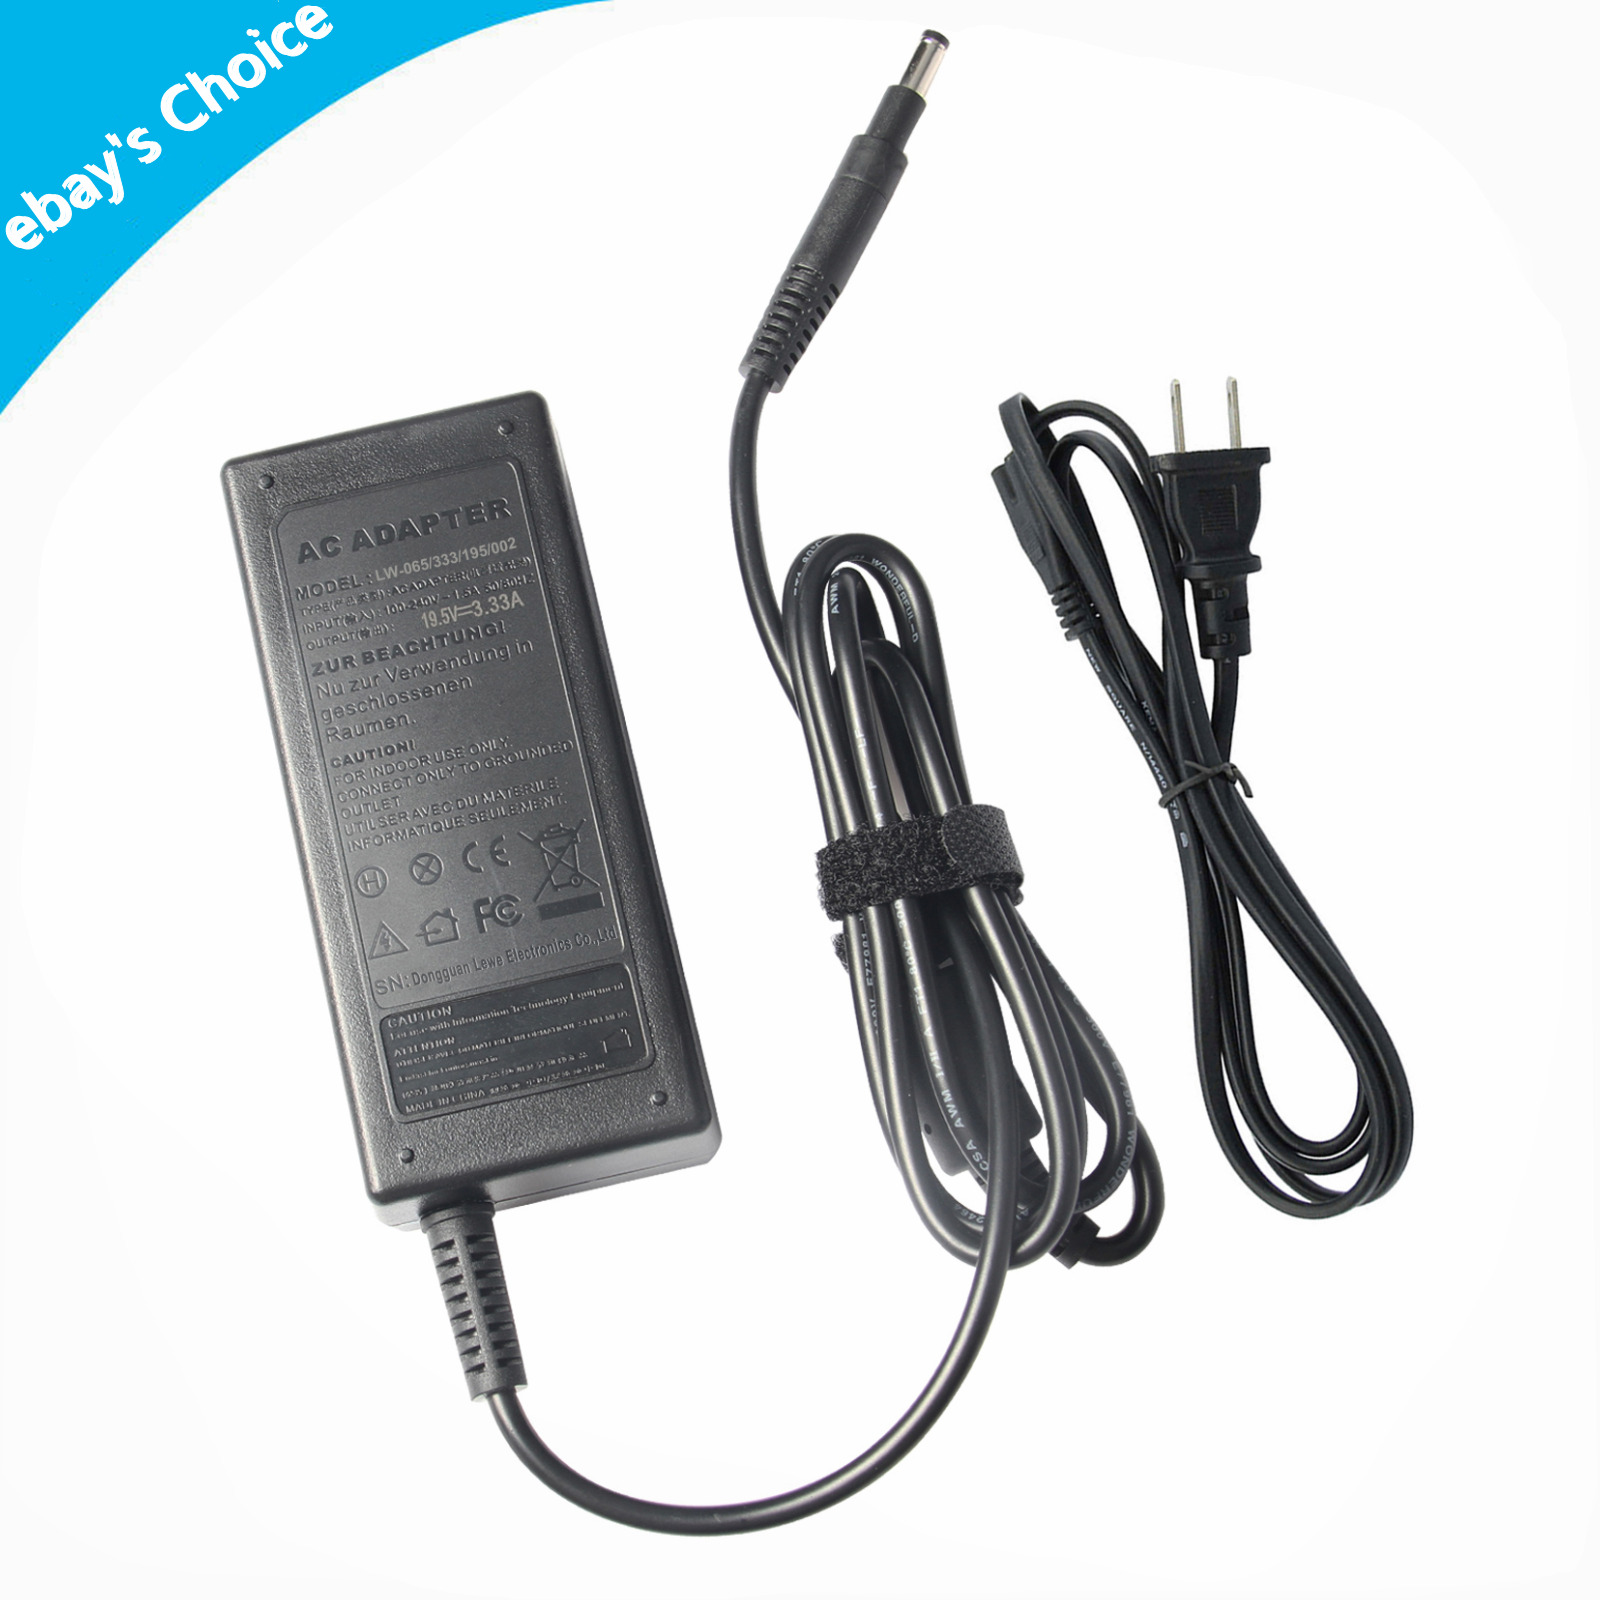 AC Adapter Charger For HP Pavilion TouchSmart 15-b129wm 15-b150us 15-b153cl